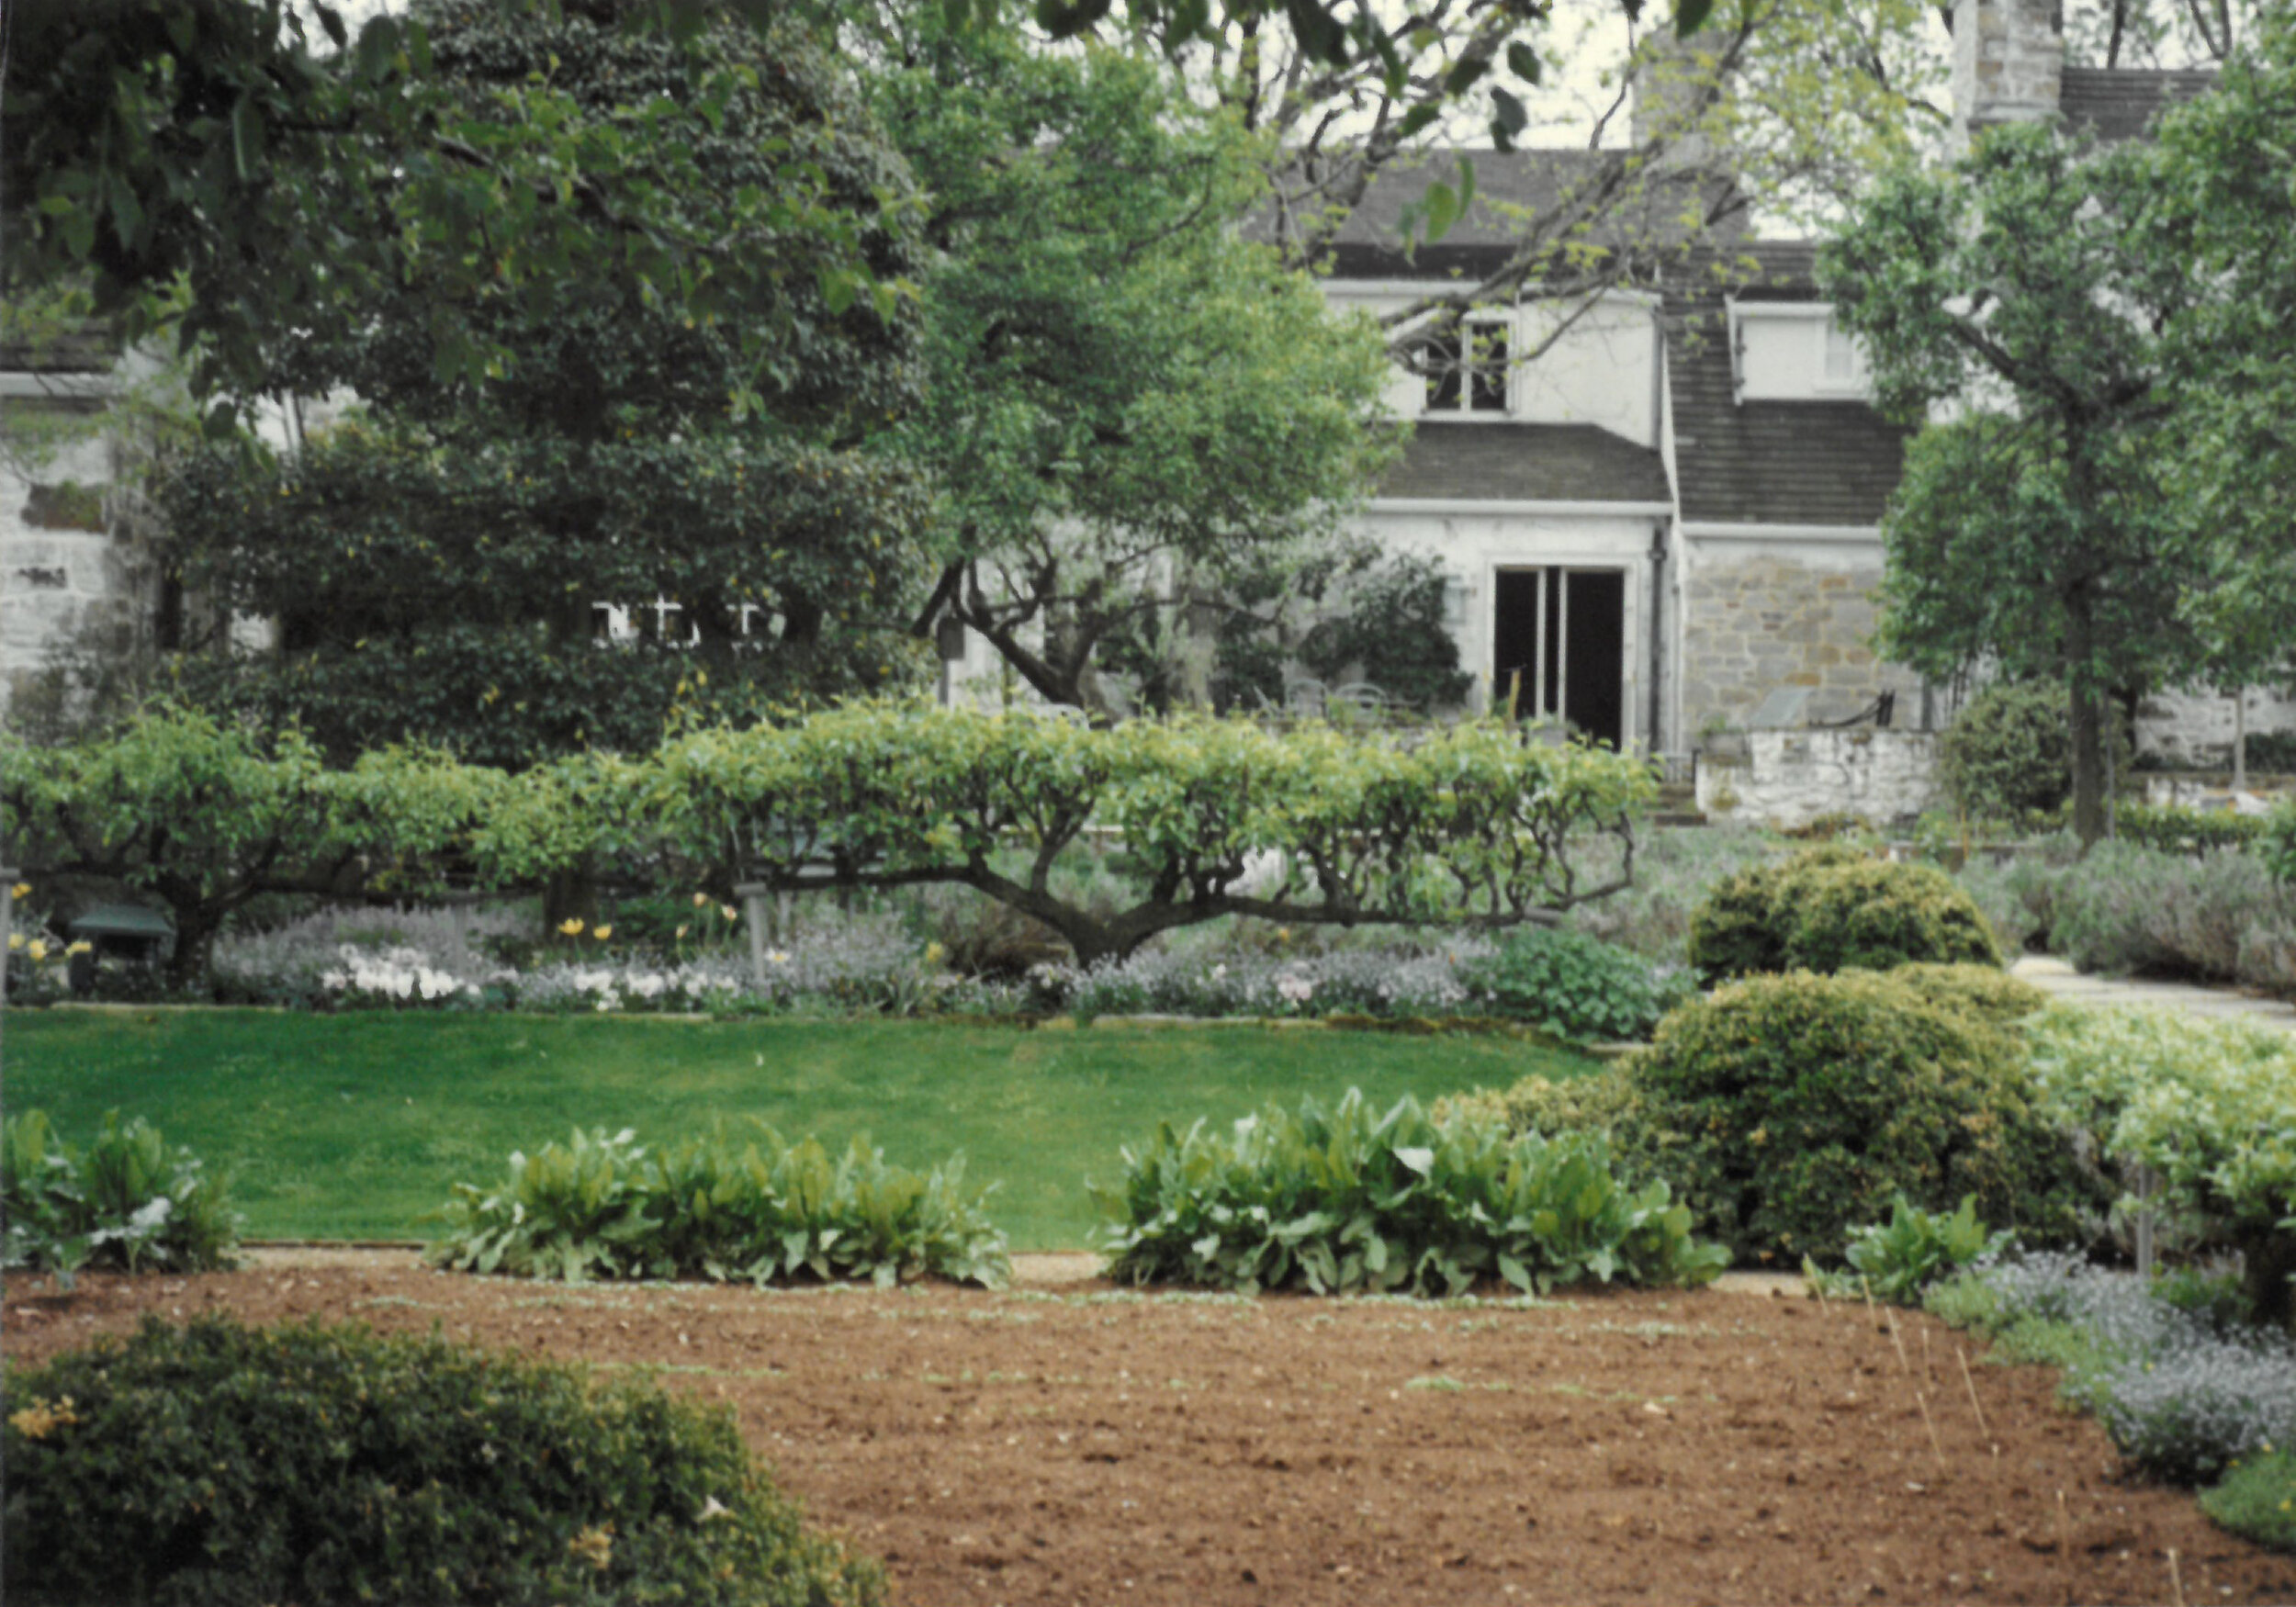  The walled garden at the Mellon Main Residence has seen many changes over the more fifty years that it was tended by Mrs. Mellon. It grew as Mrs. Mellon did, and was always evolving in structure and in its plantings as Mrs. Mellon’s tastes changed a